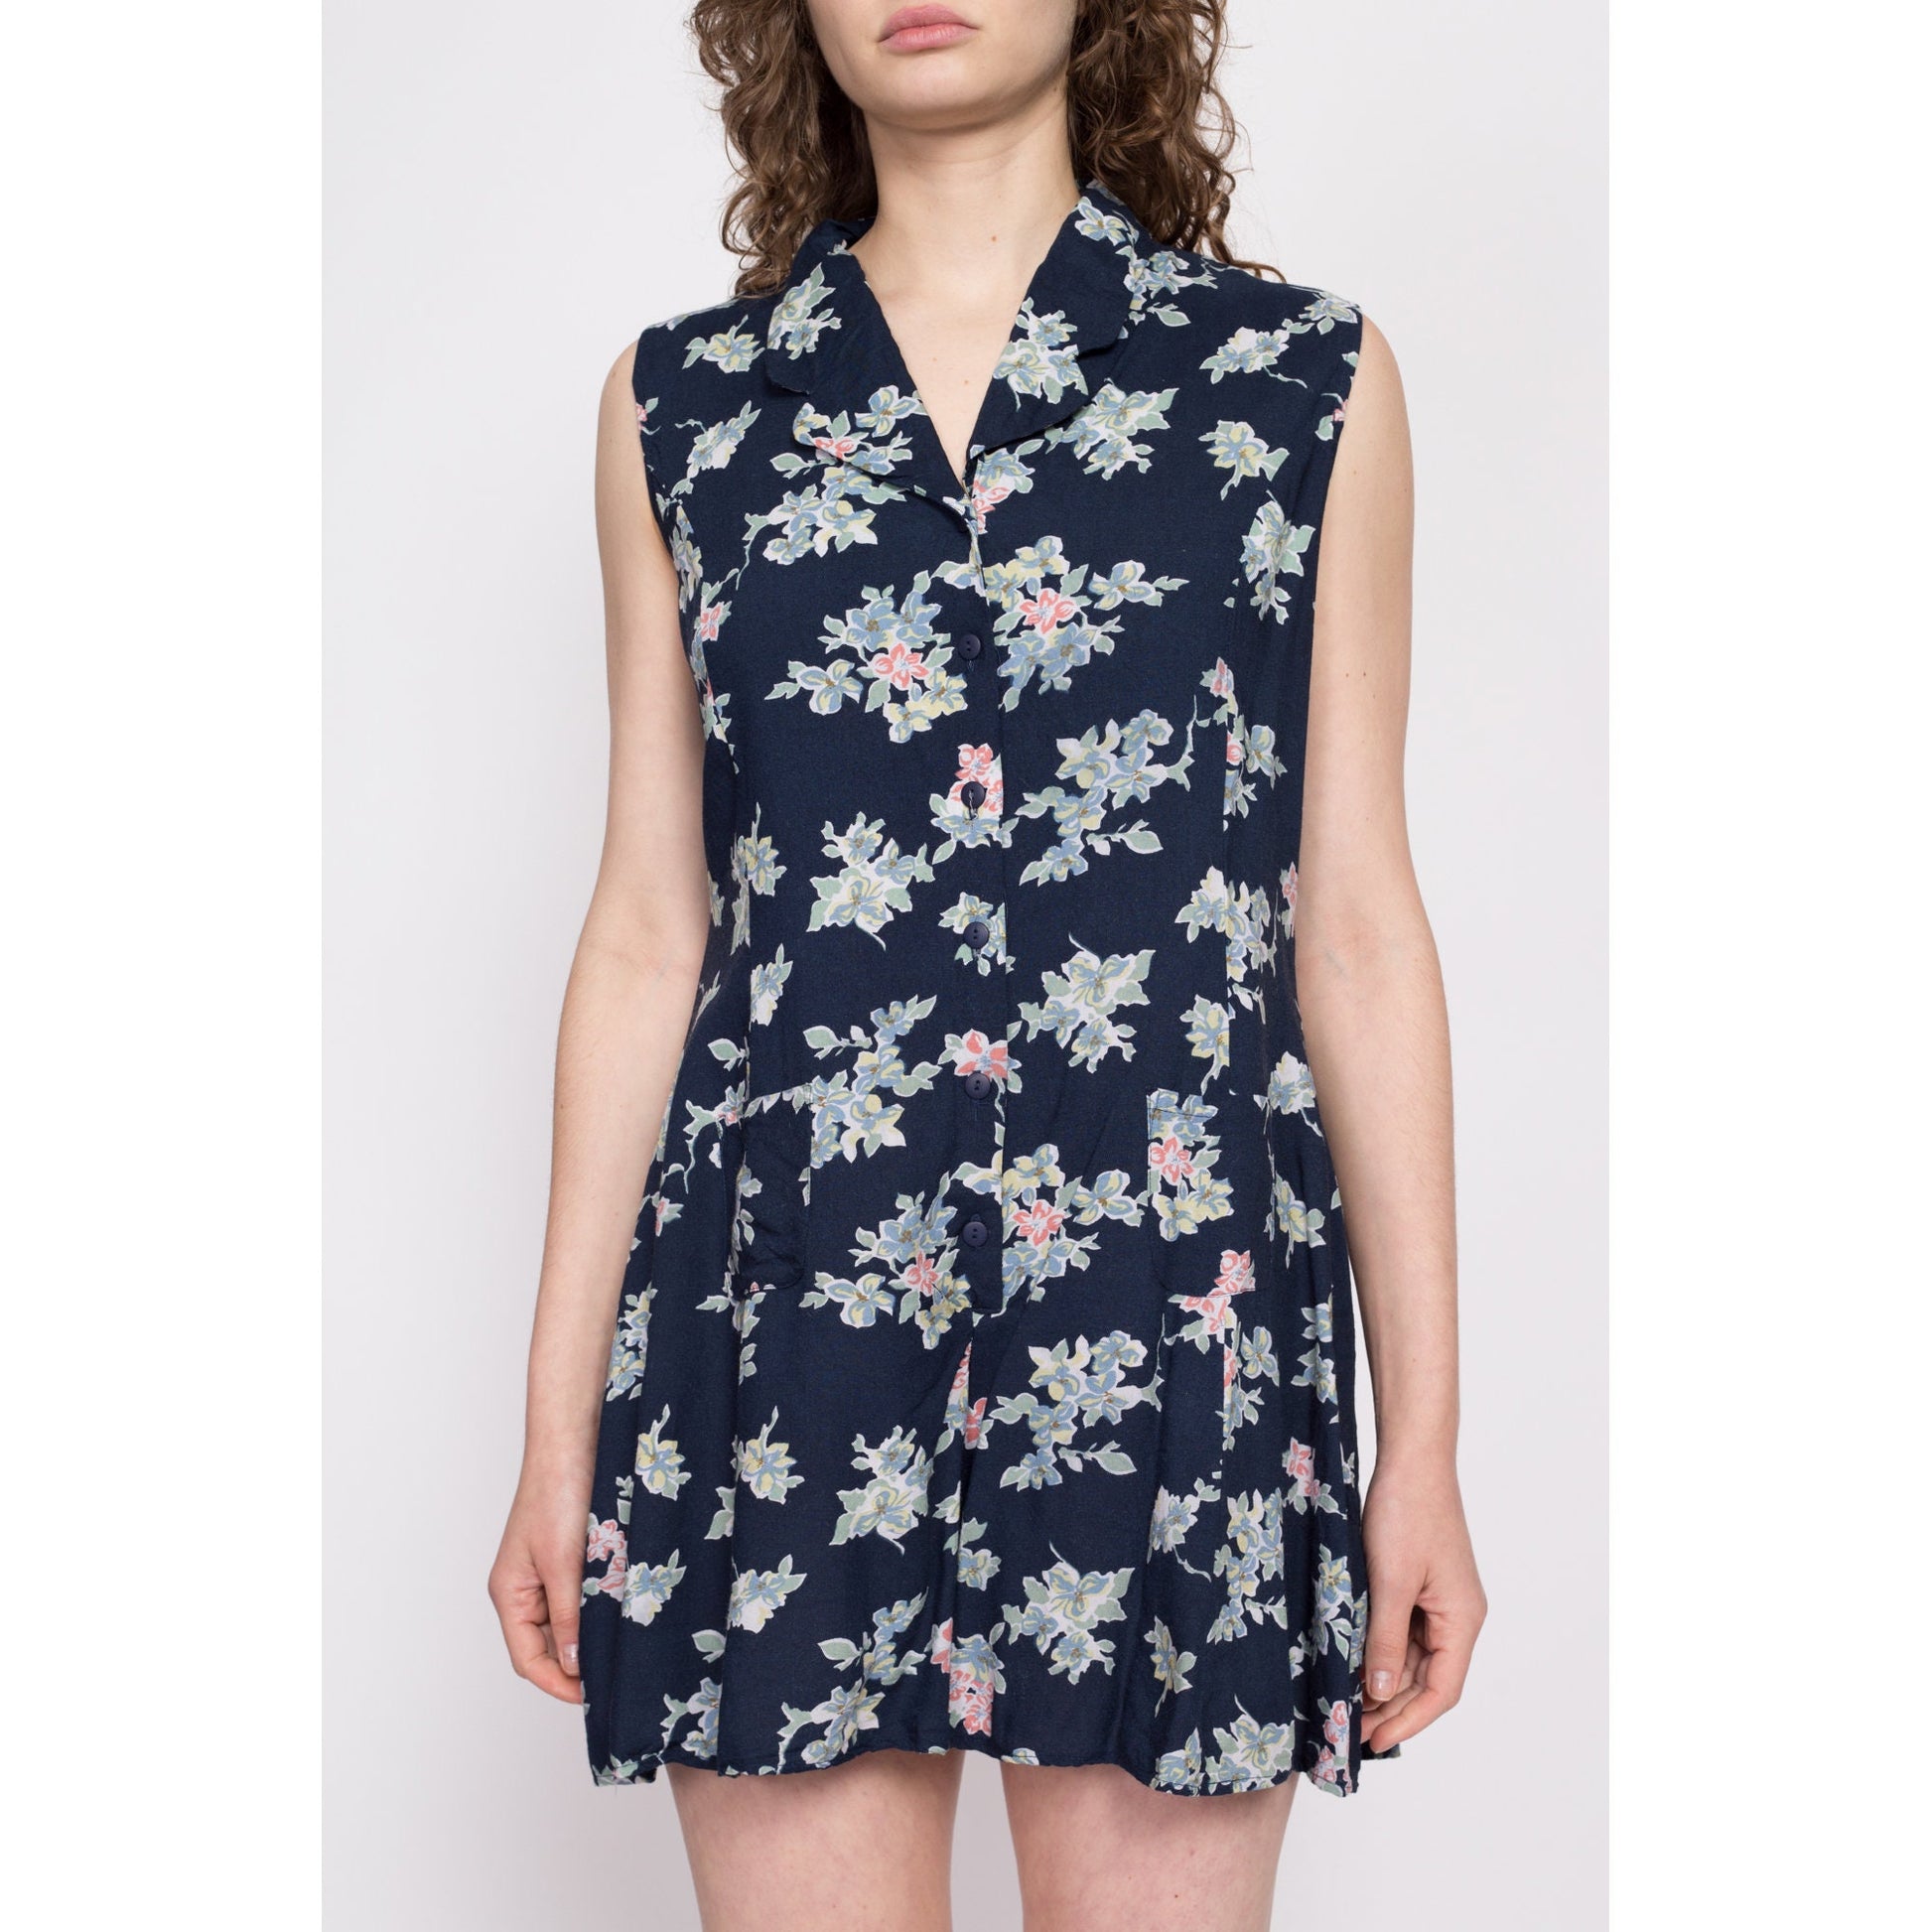 90s Navy Blue Floral Romper - Medium | Vintage Collared Button Up Sleeveless Playsuit